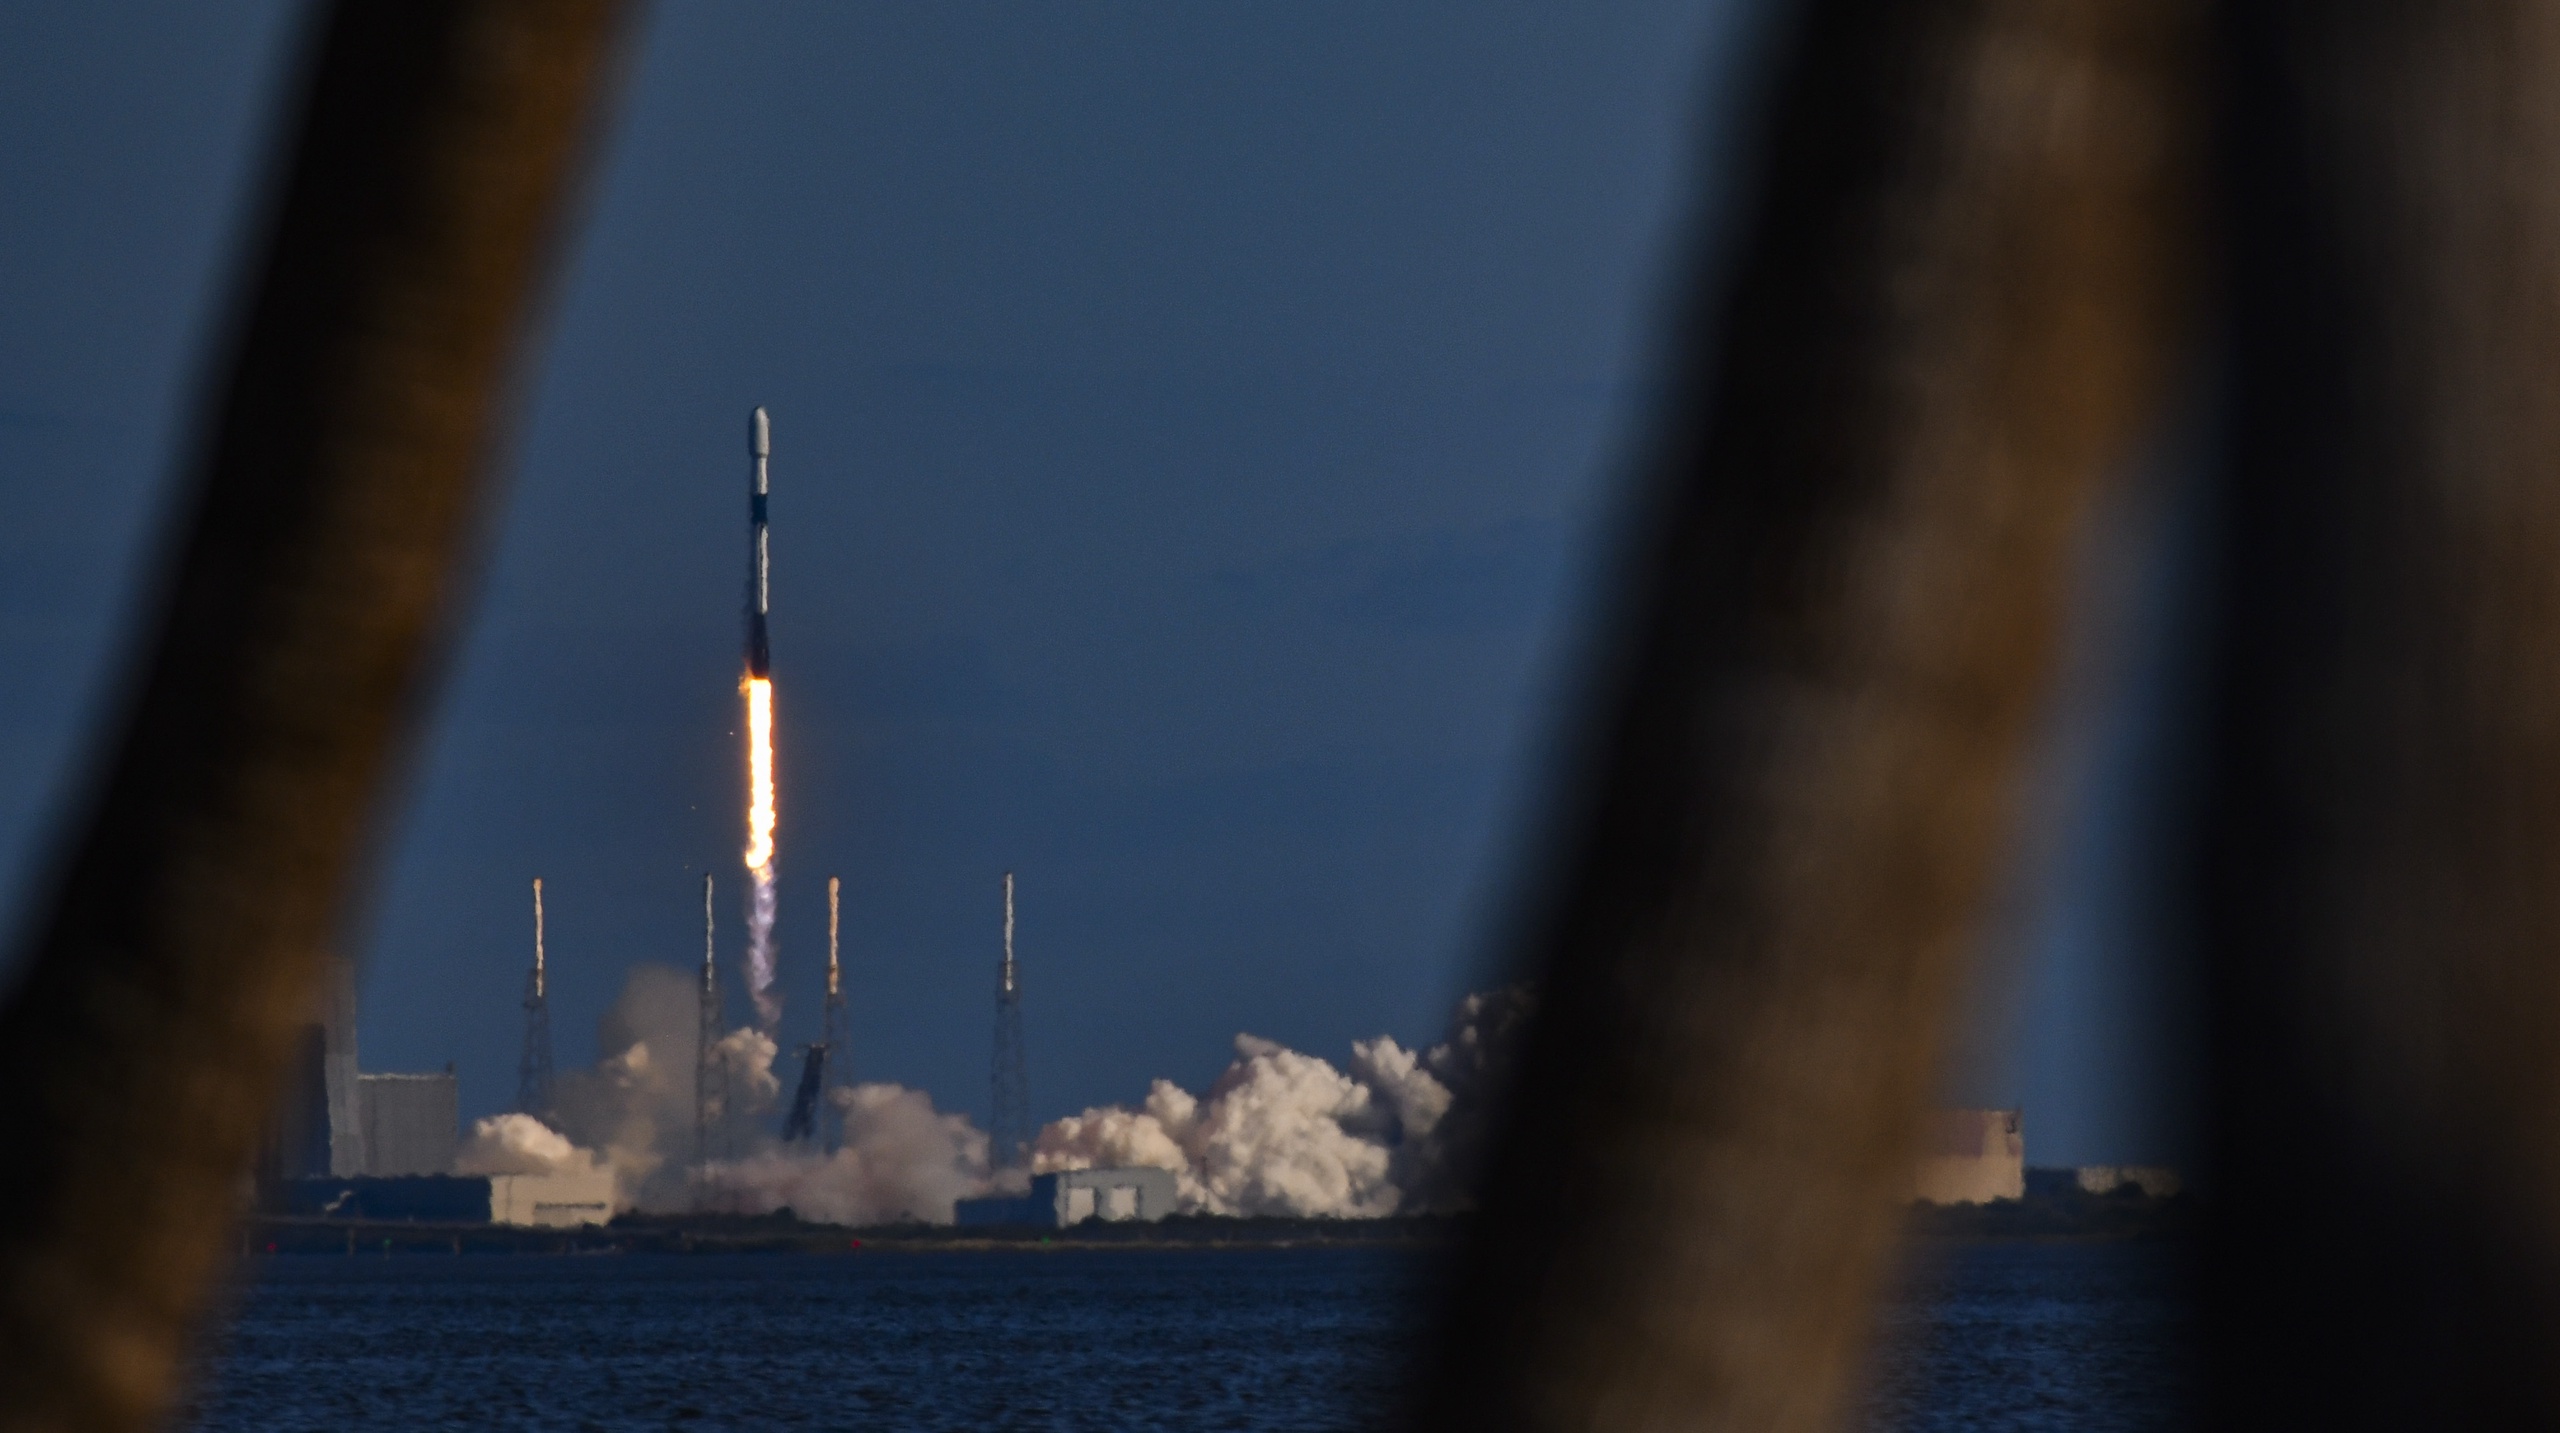 SpaceX's first launch of 2023 took place last Monday from Cape Canaveral, Florida, and it's a real first. 